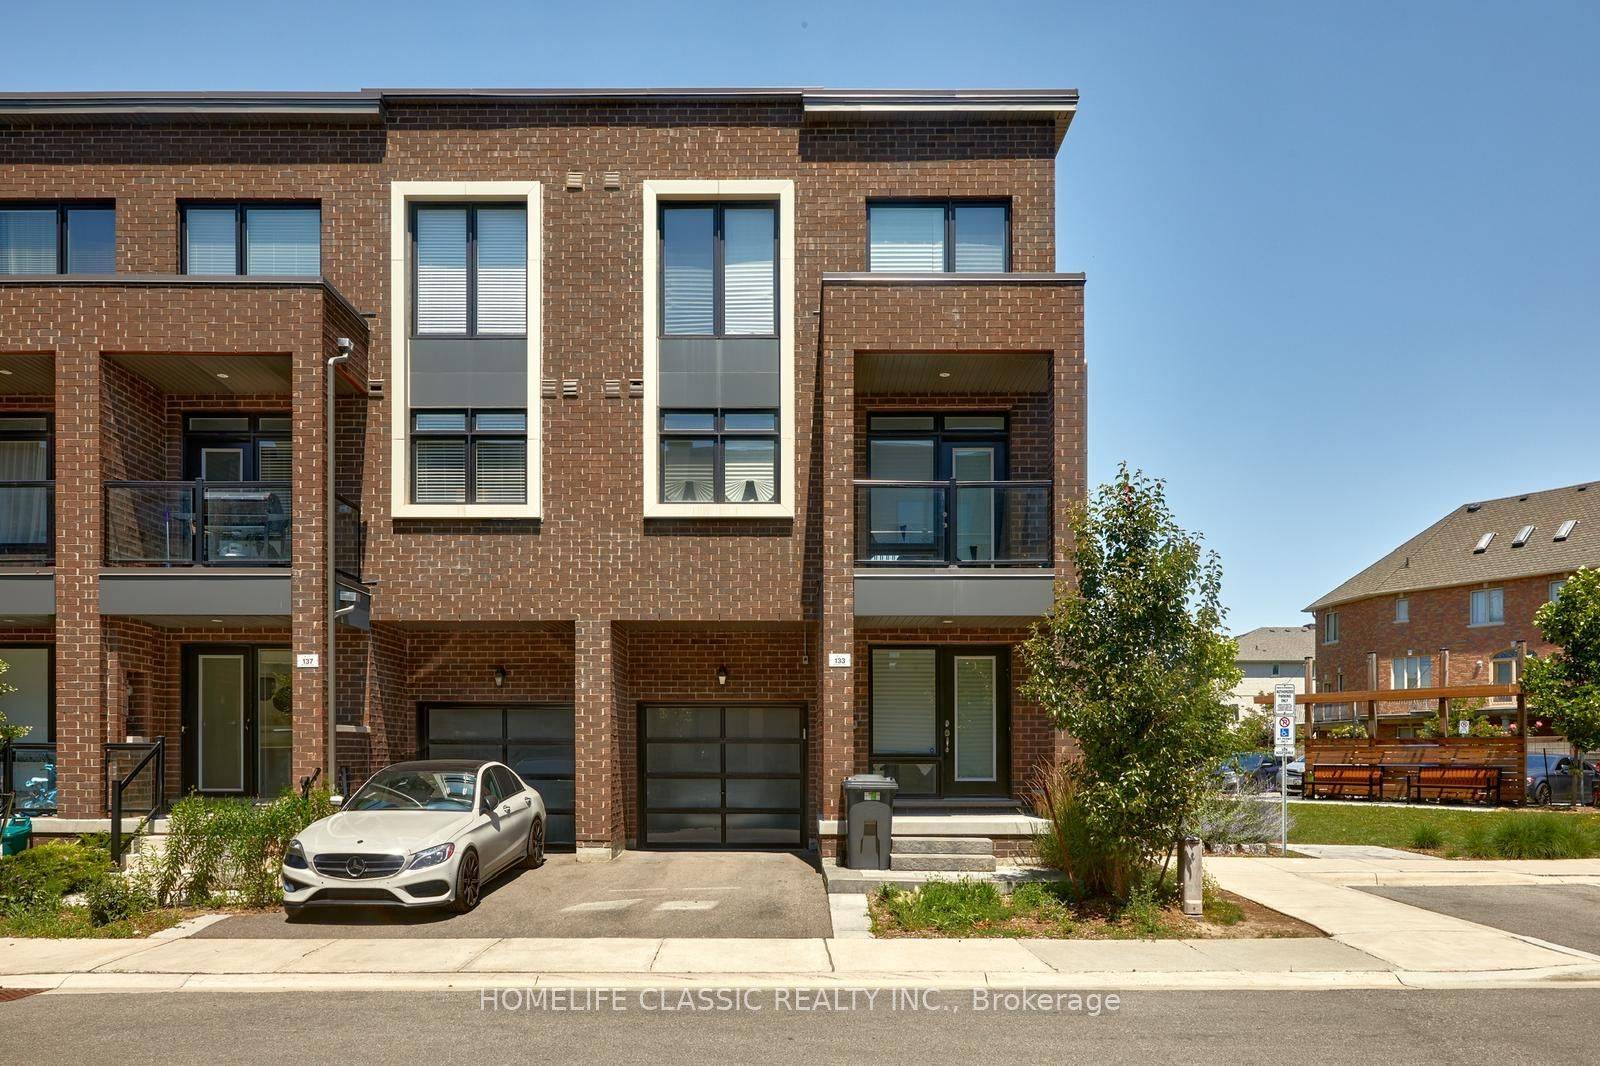 Bright Beautiful Corner Unit 3 Bed 3 Story Townhome By Legendary Builder City Park Homes.